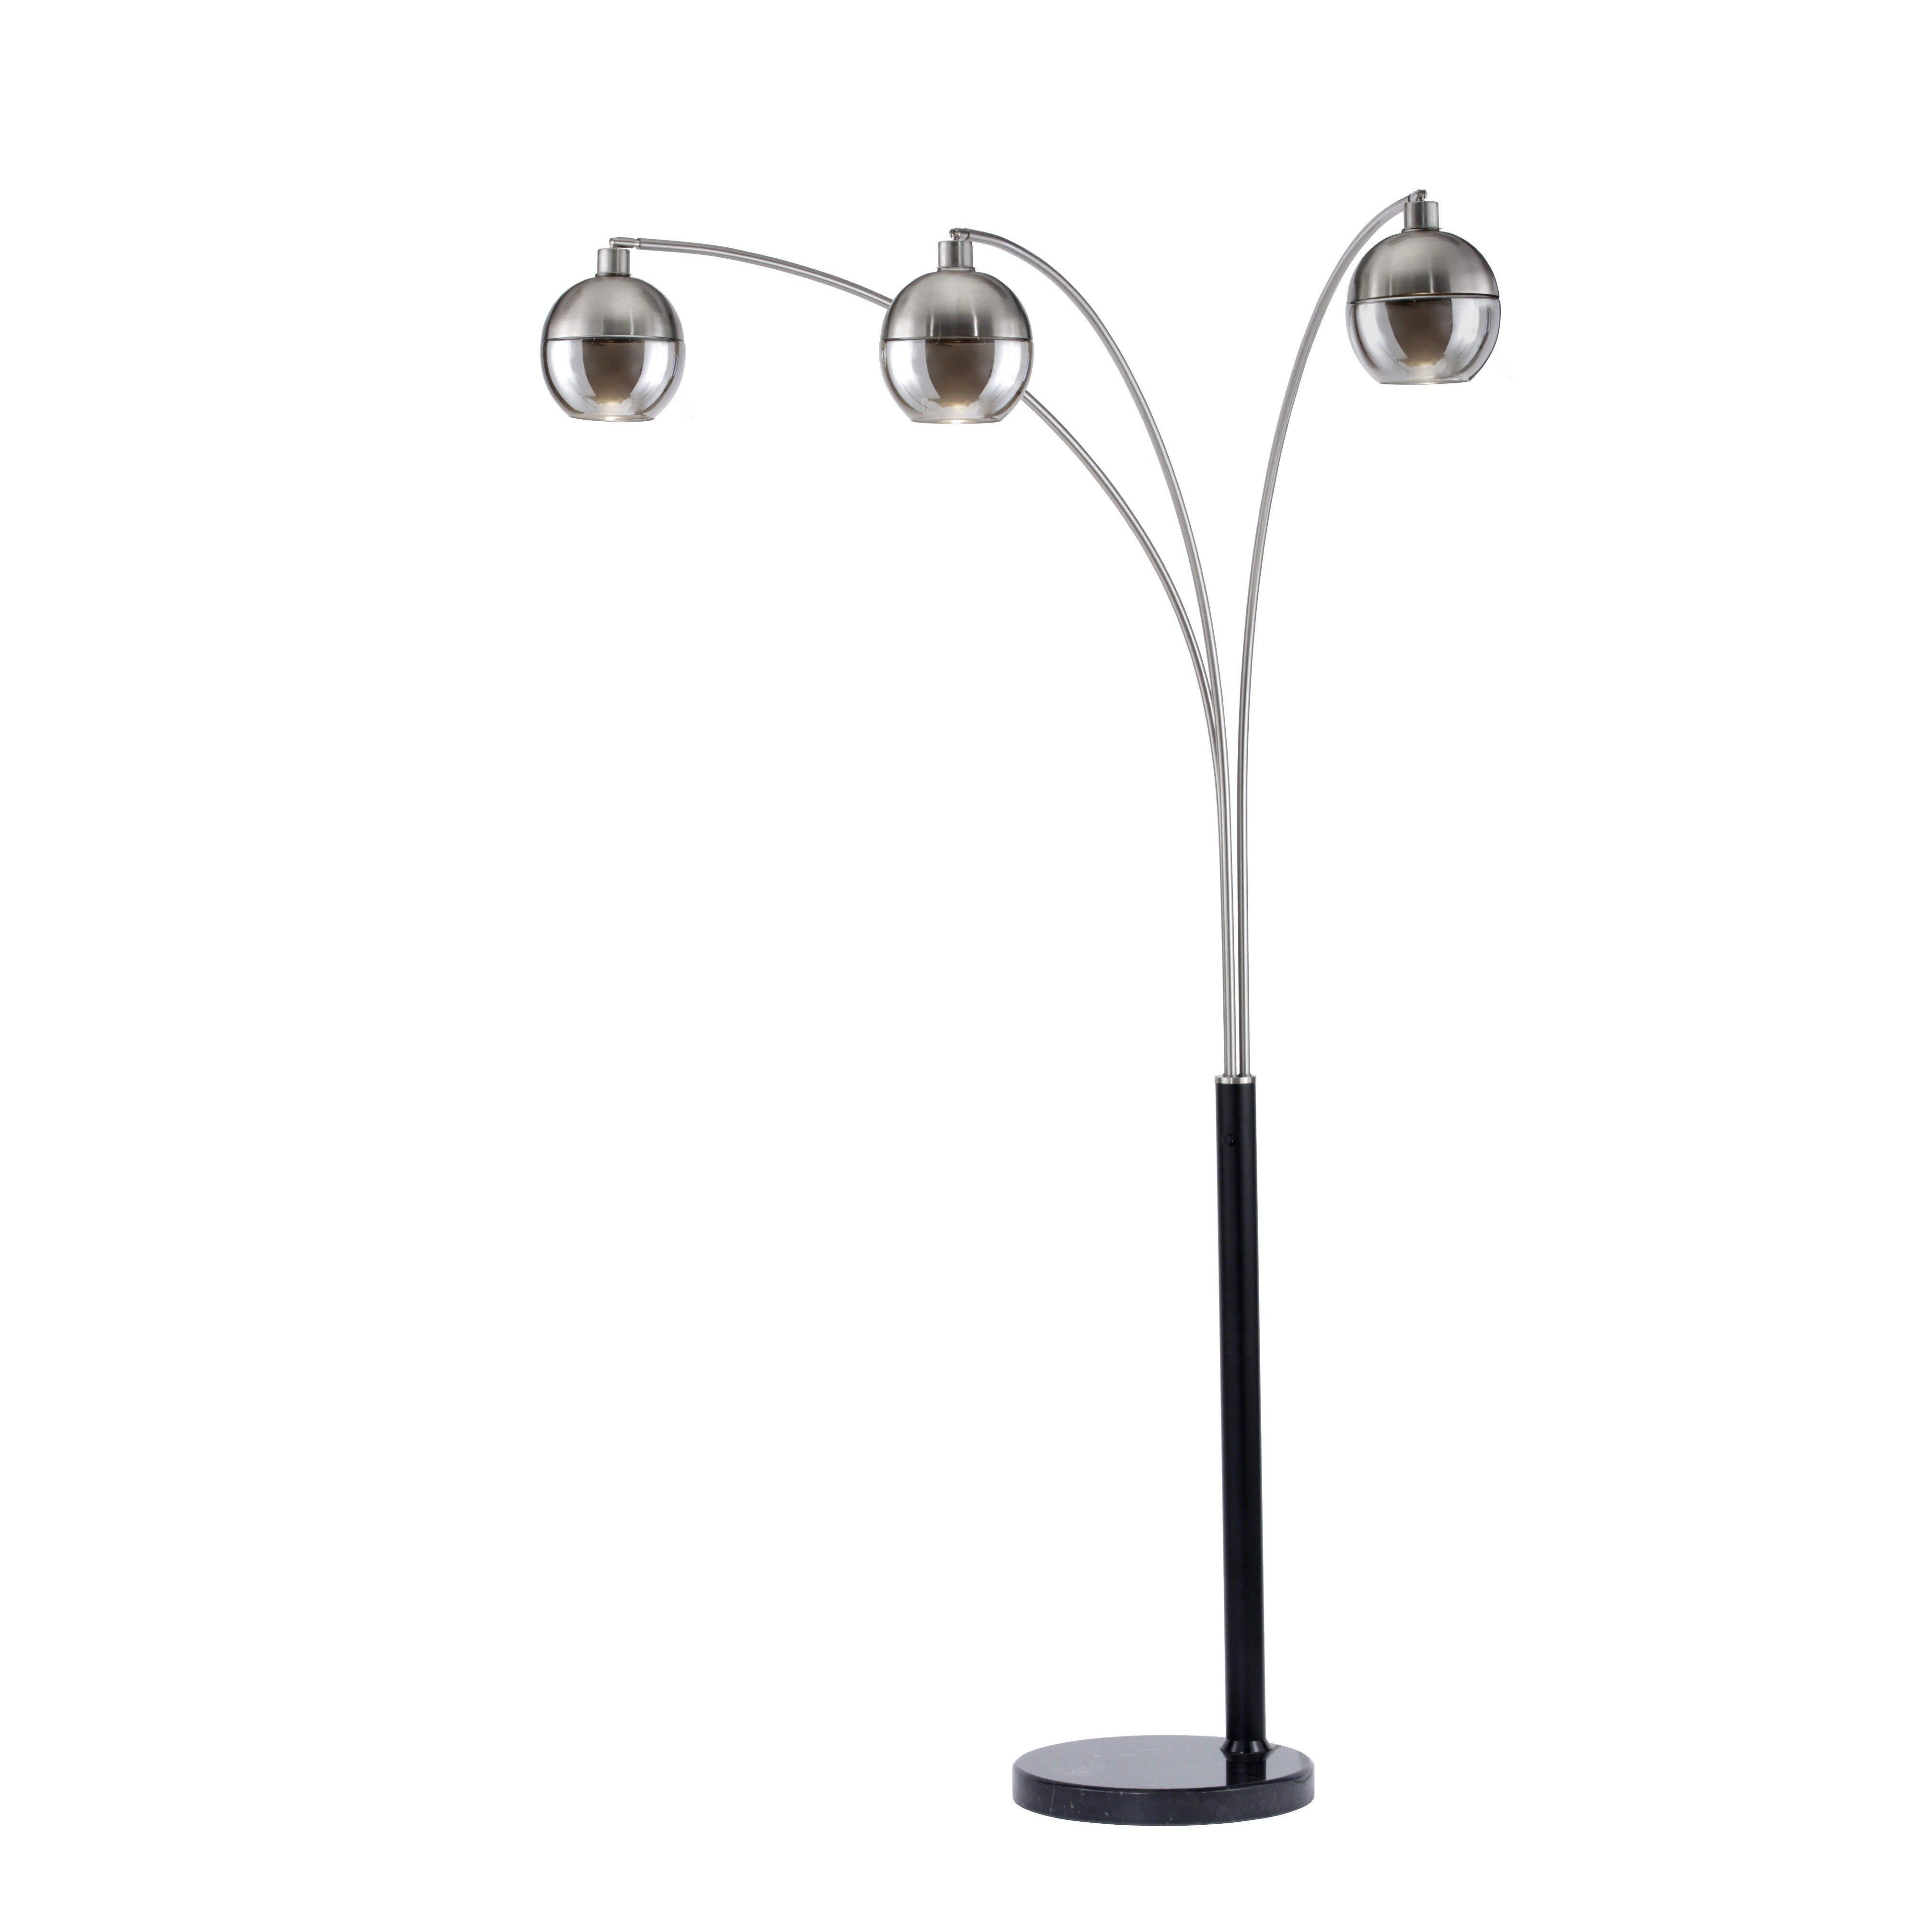 Orson Three Light Arc Lamp Brushed Nickel Products Arc pertaining to size 4032 X 4032